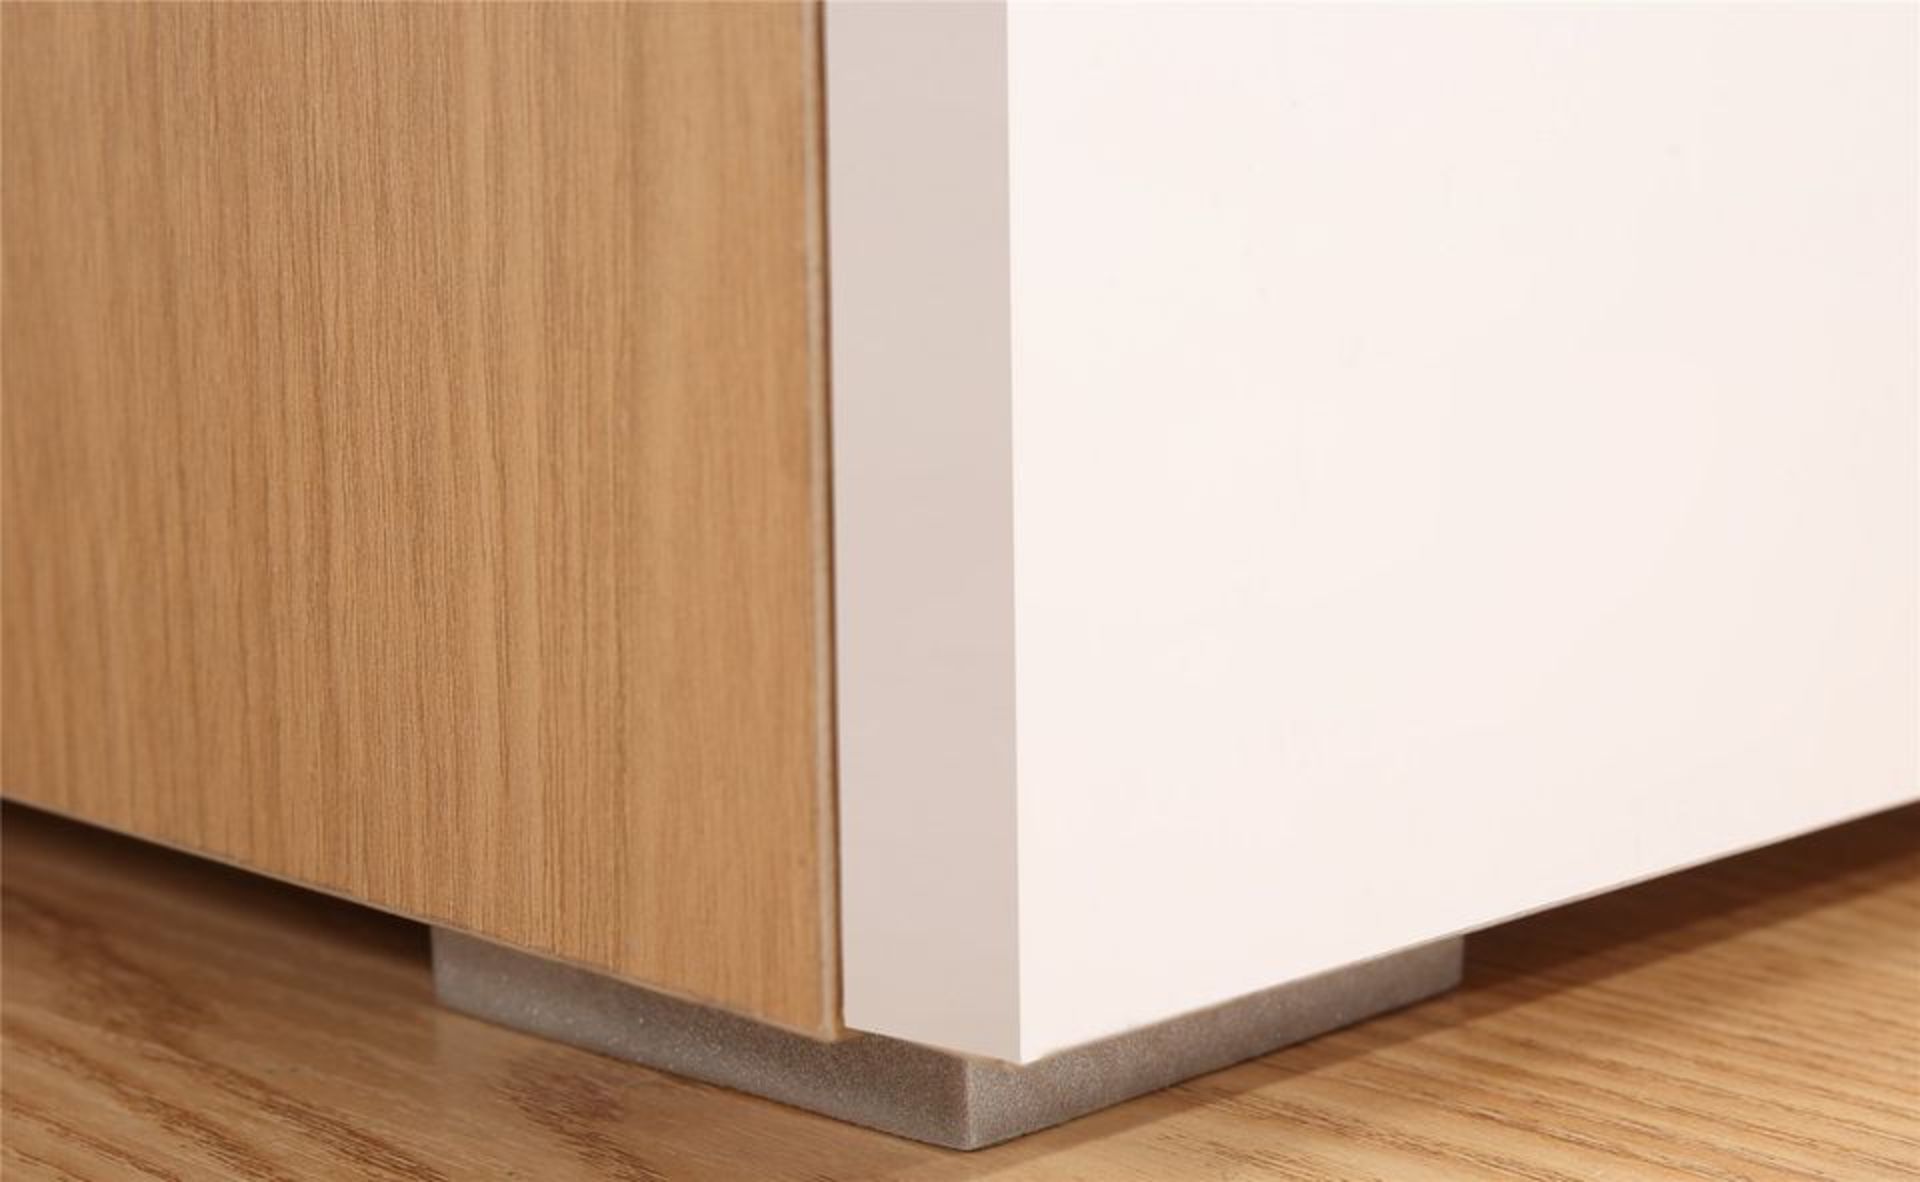 BRAND NEW 160CM WHITE ON OAK TV STAND (TV32) - Image 10 of 10